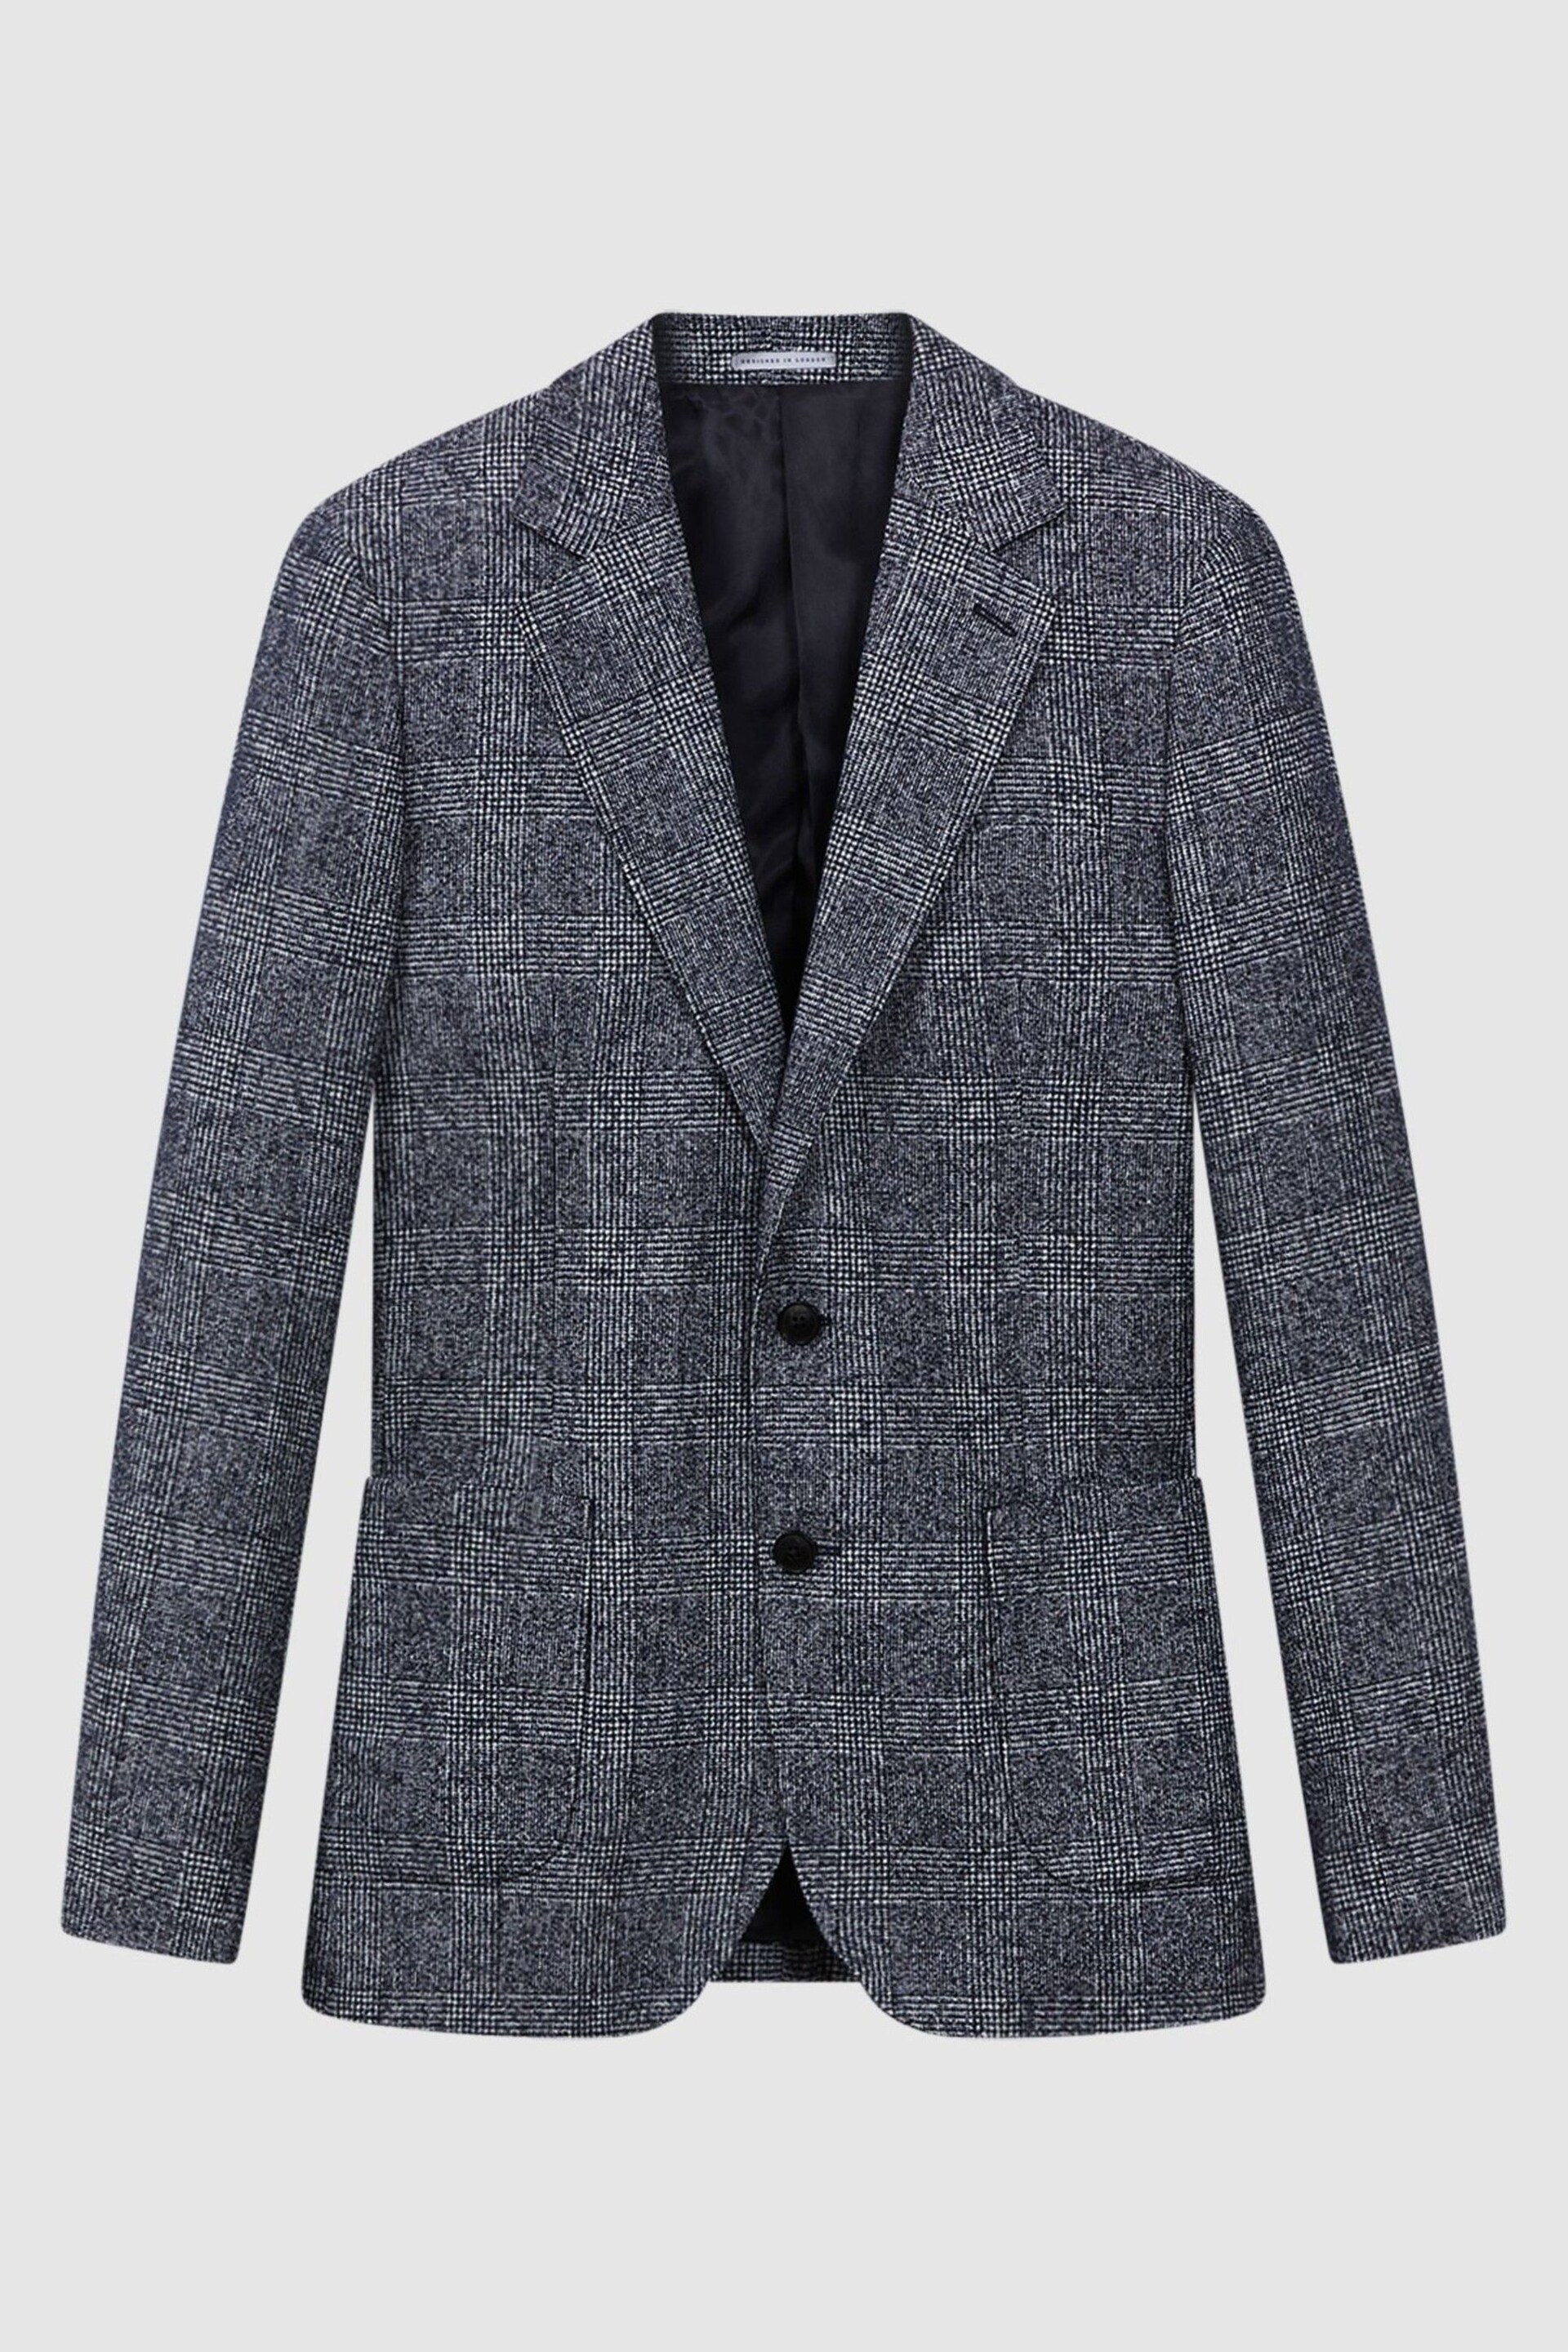 Reiss Navy Lindhurst Slim Fit Single Breasted Check Blazer - Image 2 of 7